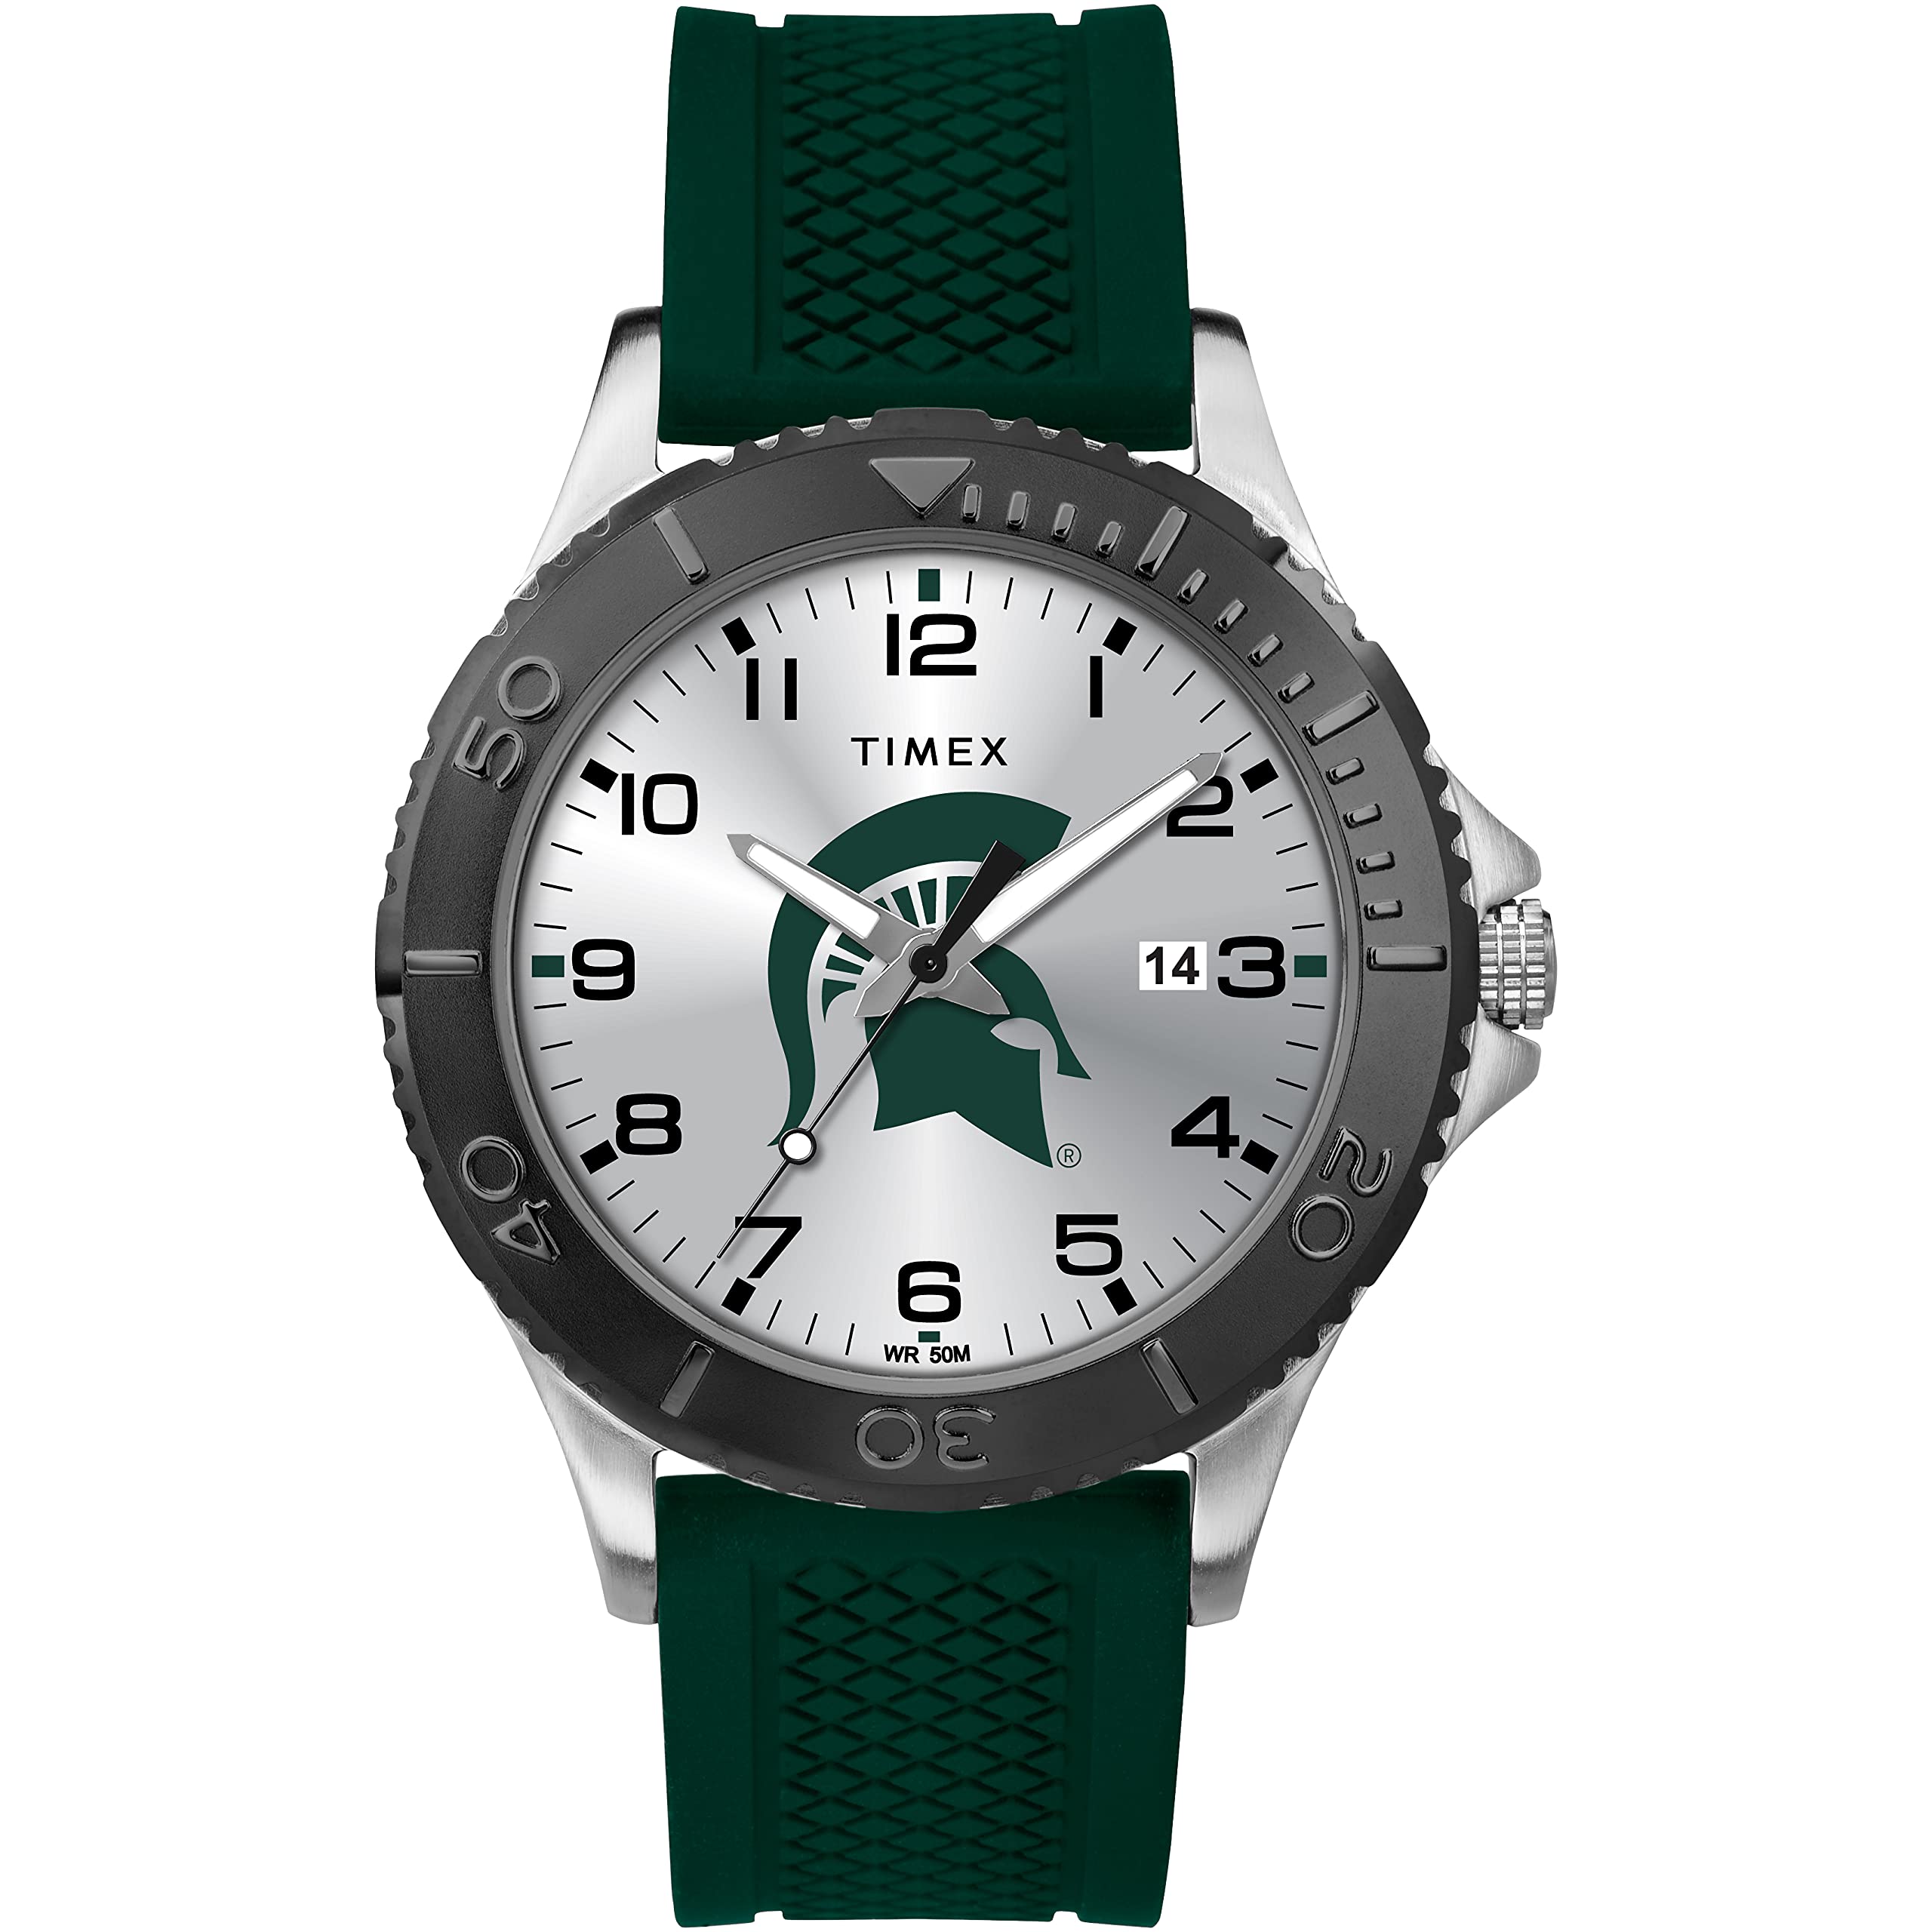 Timex Men's Collegiate Gamer 42mm Watch – Michigan State Spartans with Green Silicone Strap